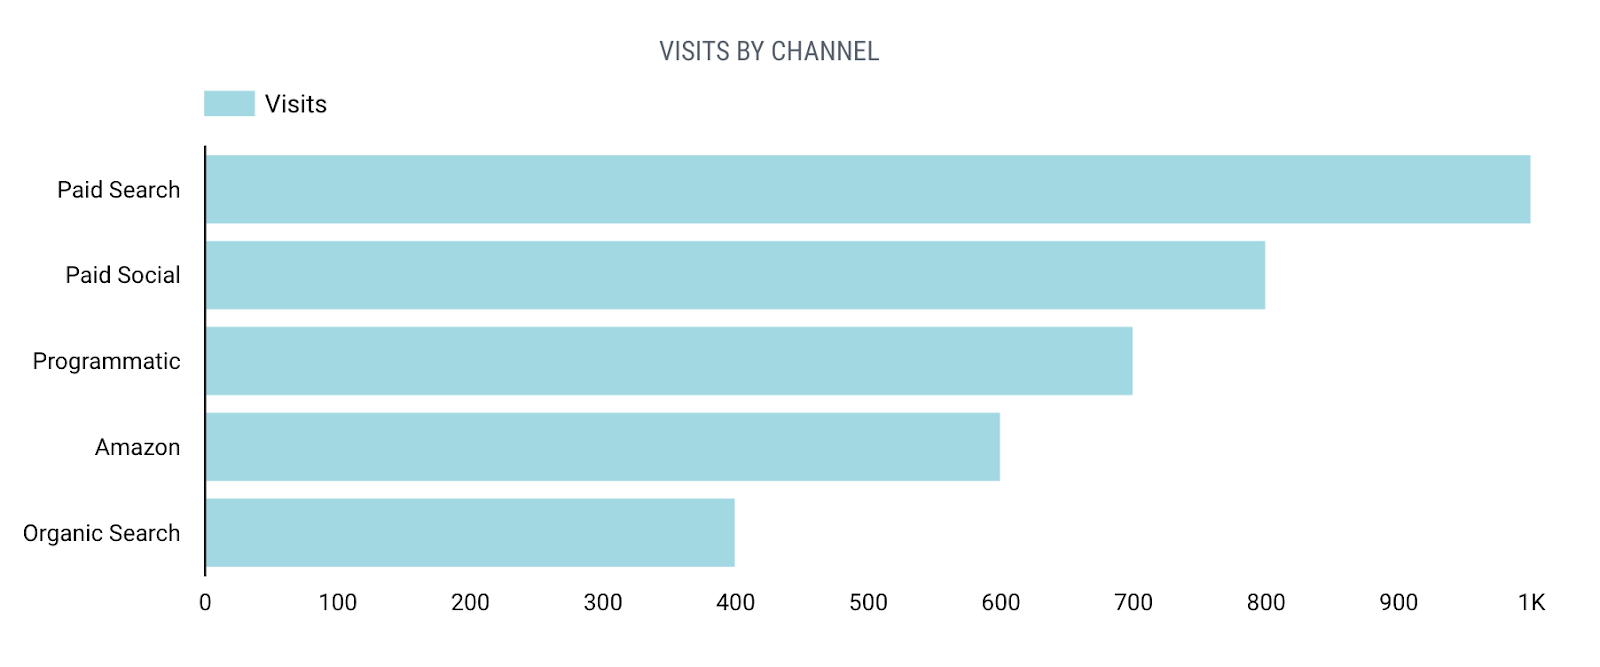 Horizontal bar chart comparing visits by channel